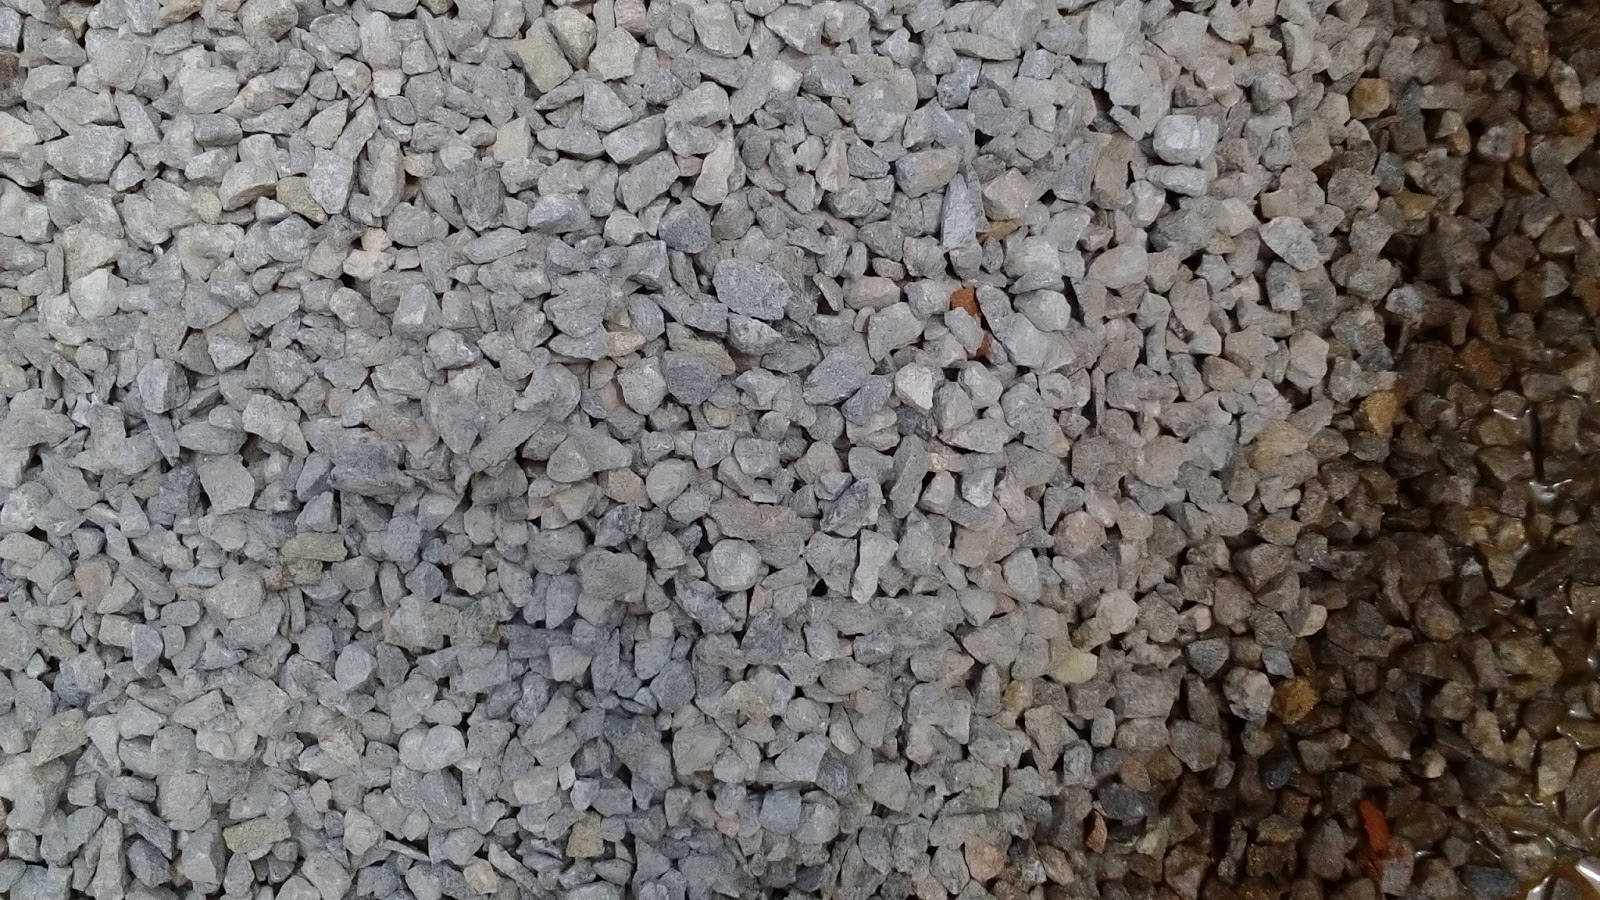 Aggregates - What is it and why is it important?